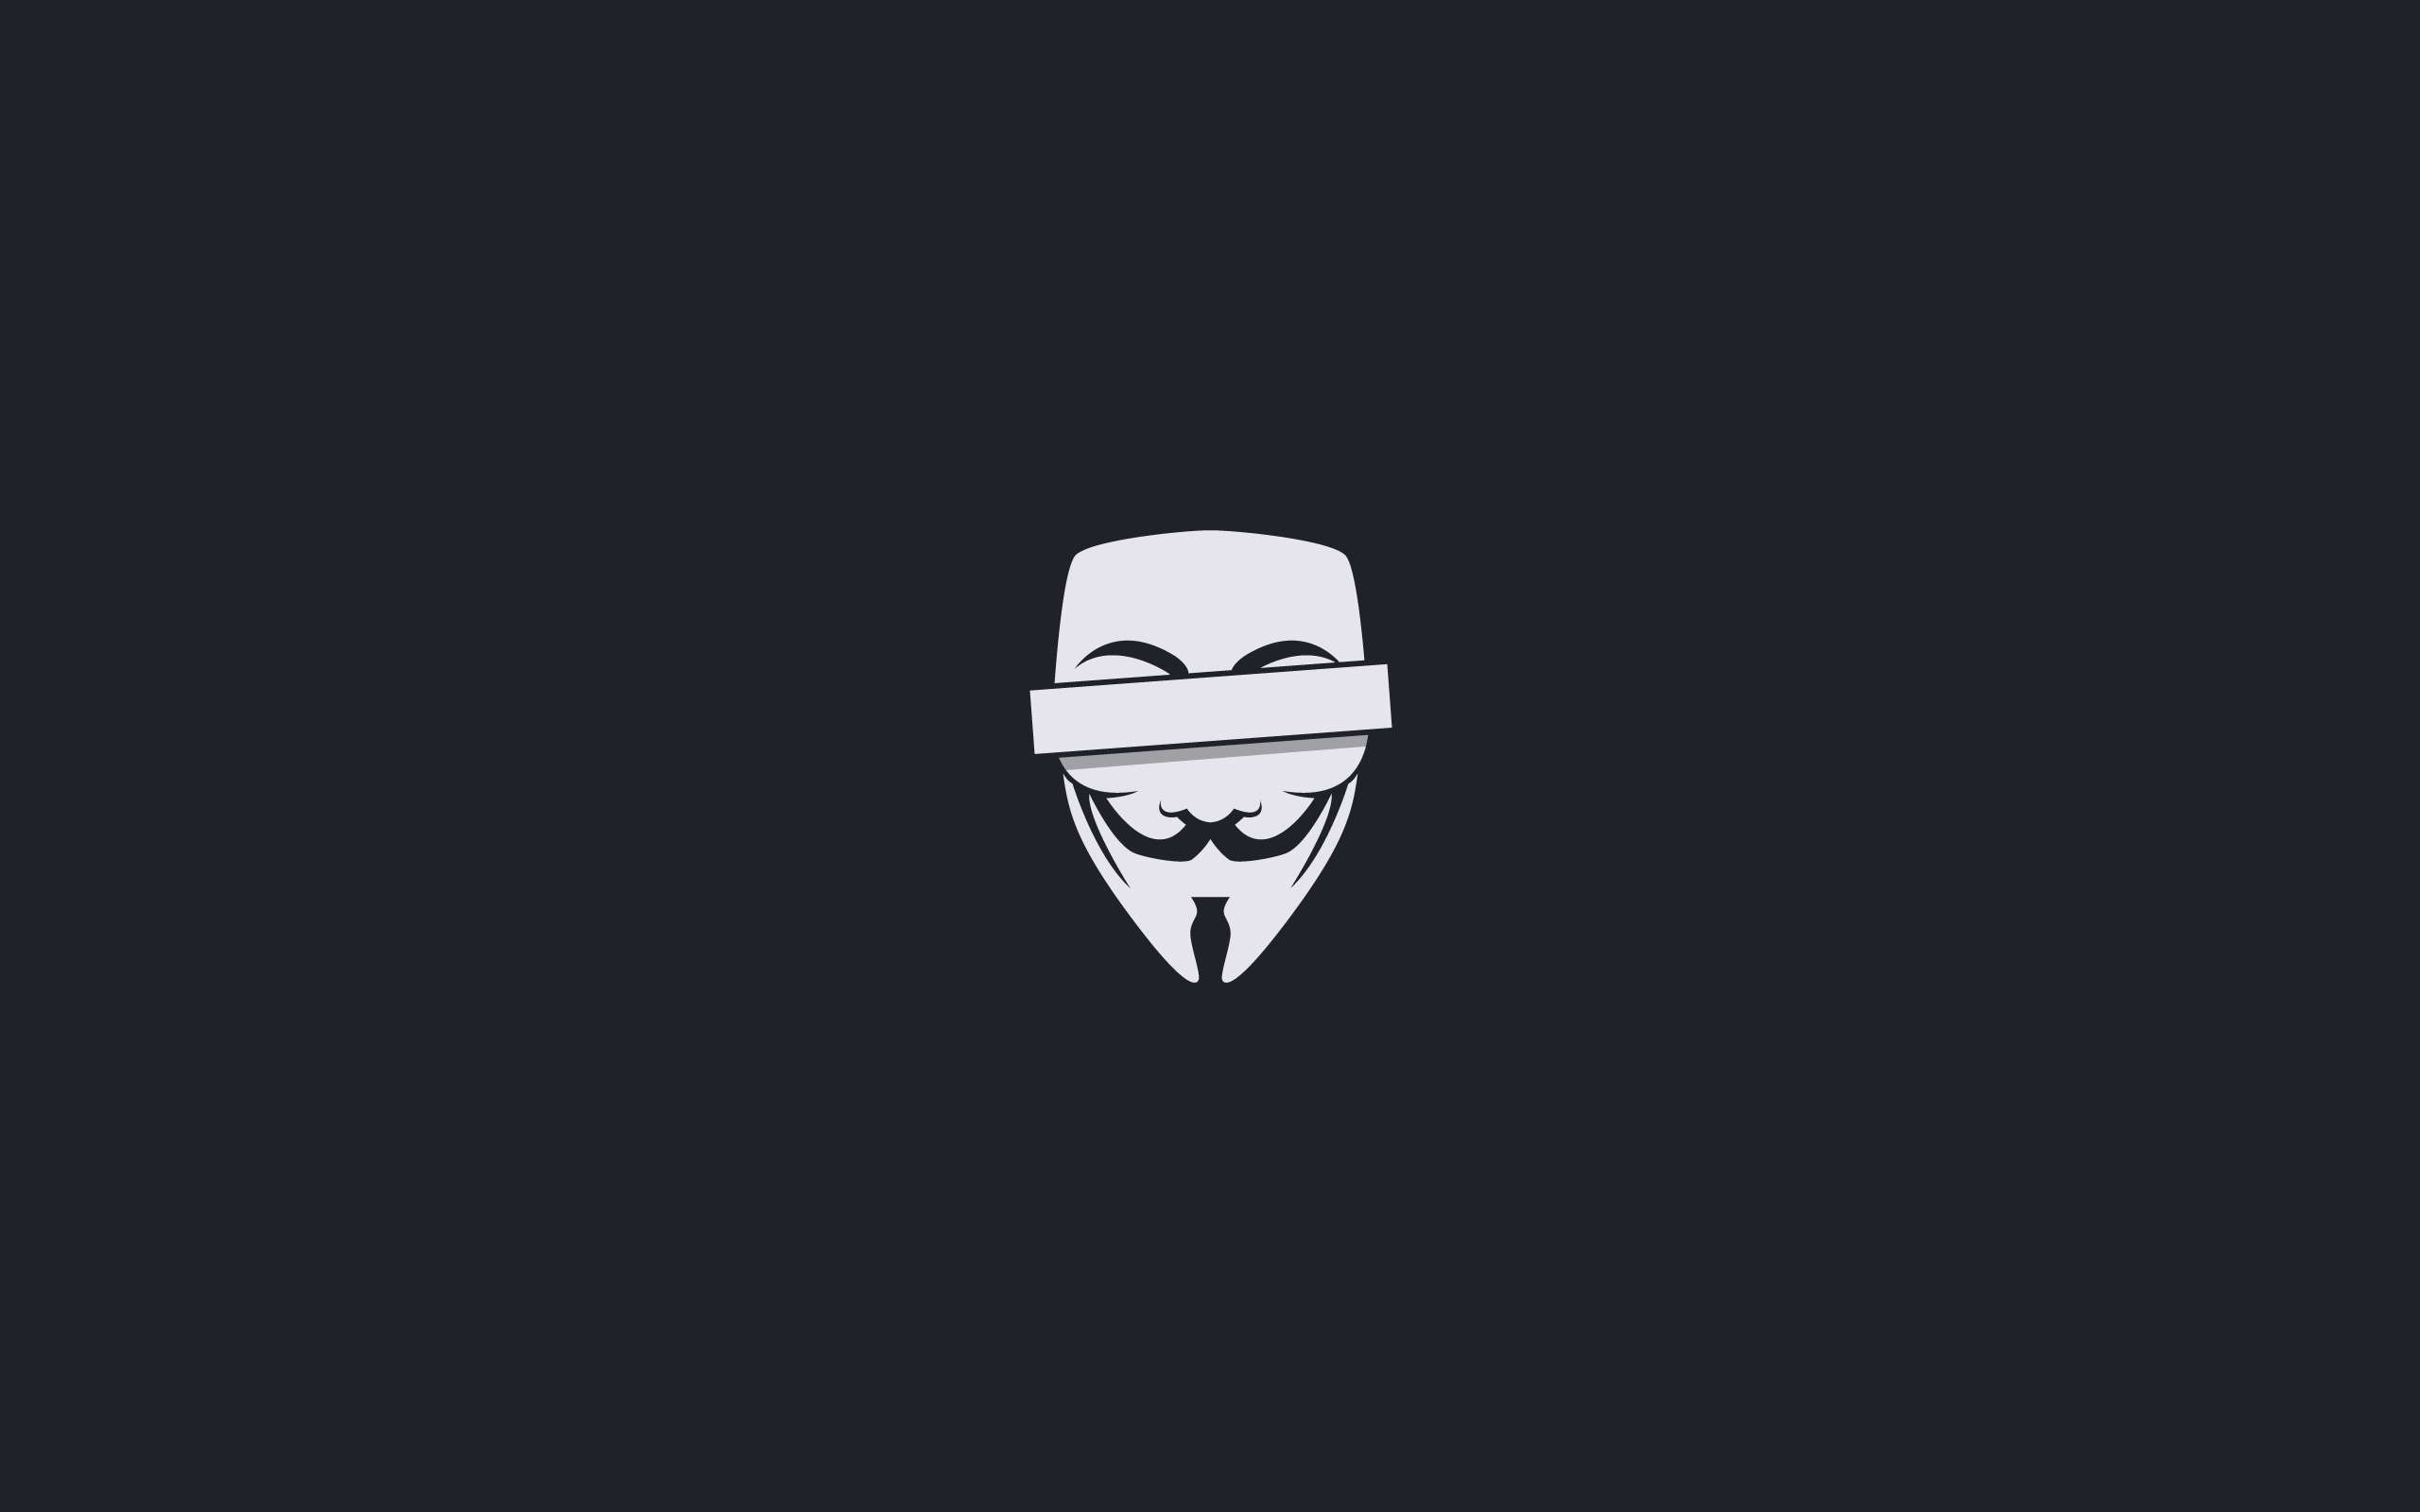 Wallpapers anonymous the guy Fawkes mask cencored on the desktop